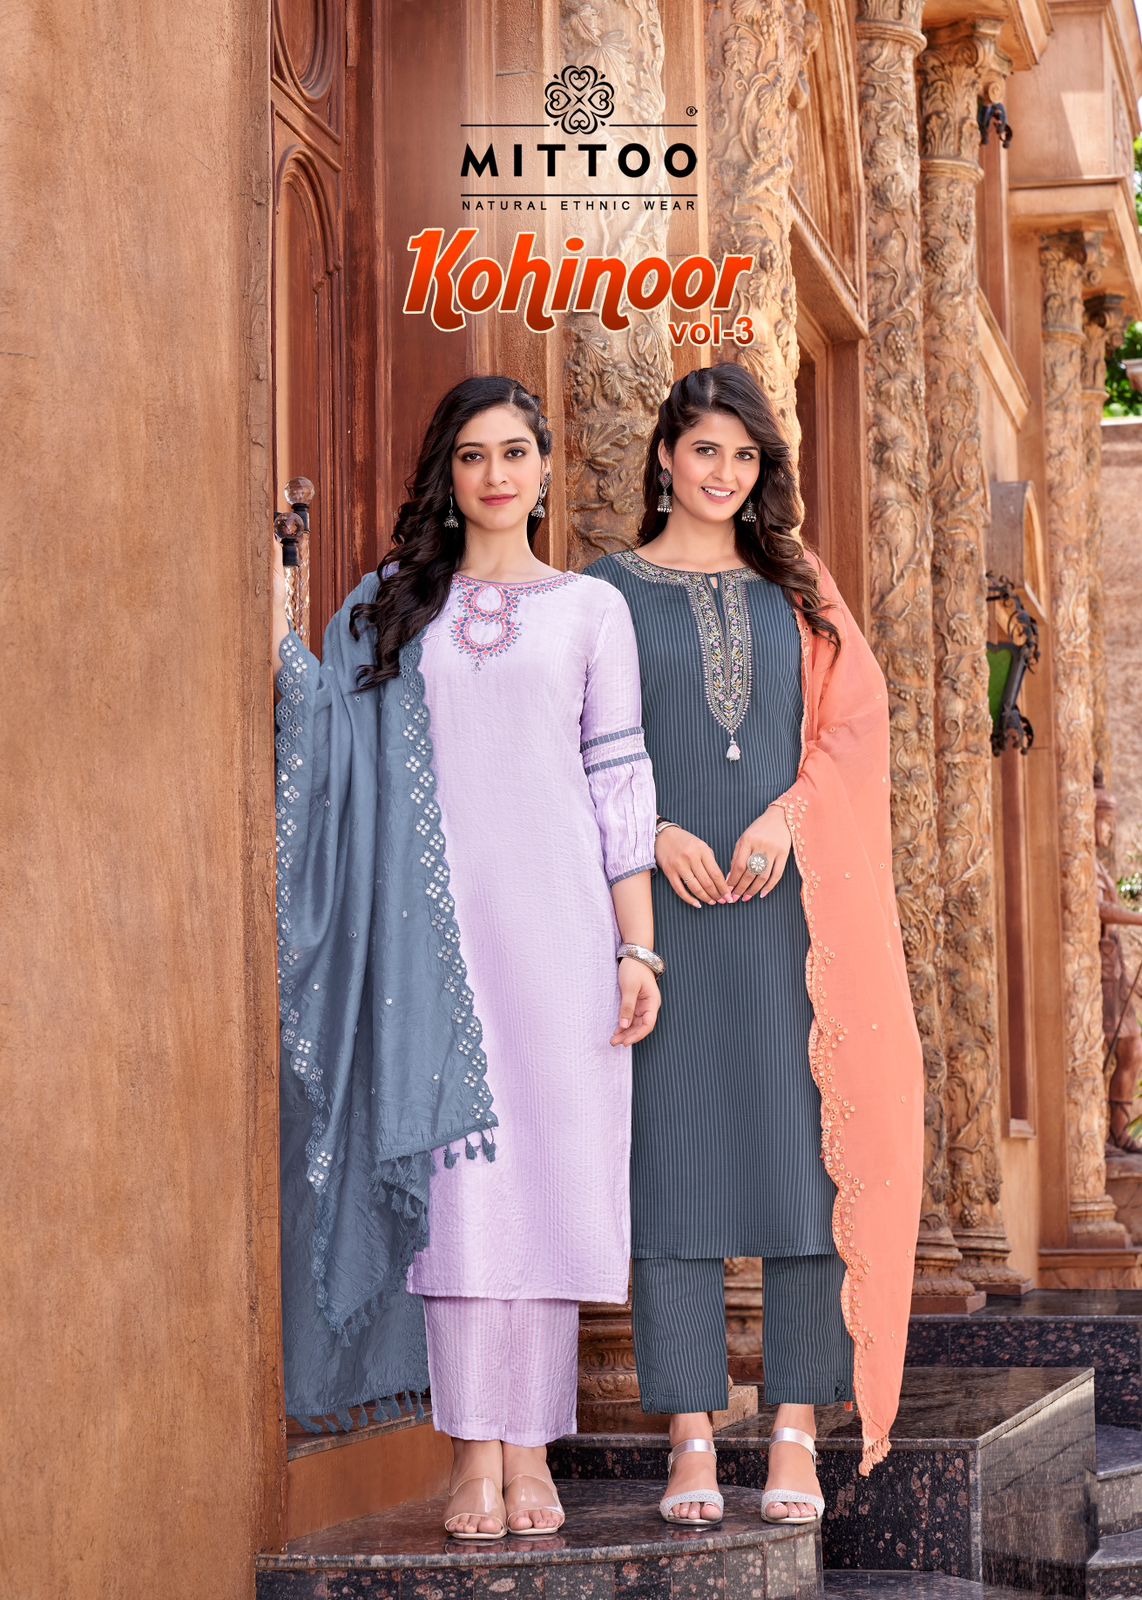 Mittoo Kohinoor Vol 3 collection 3